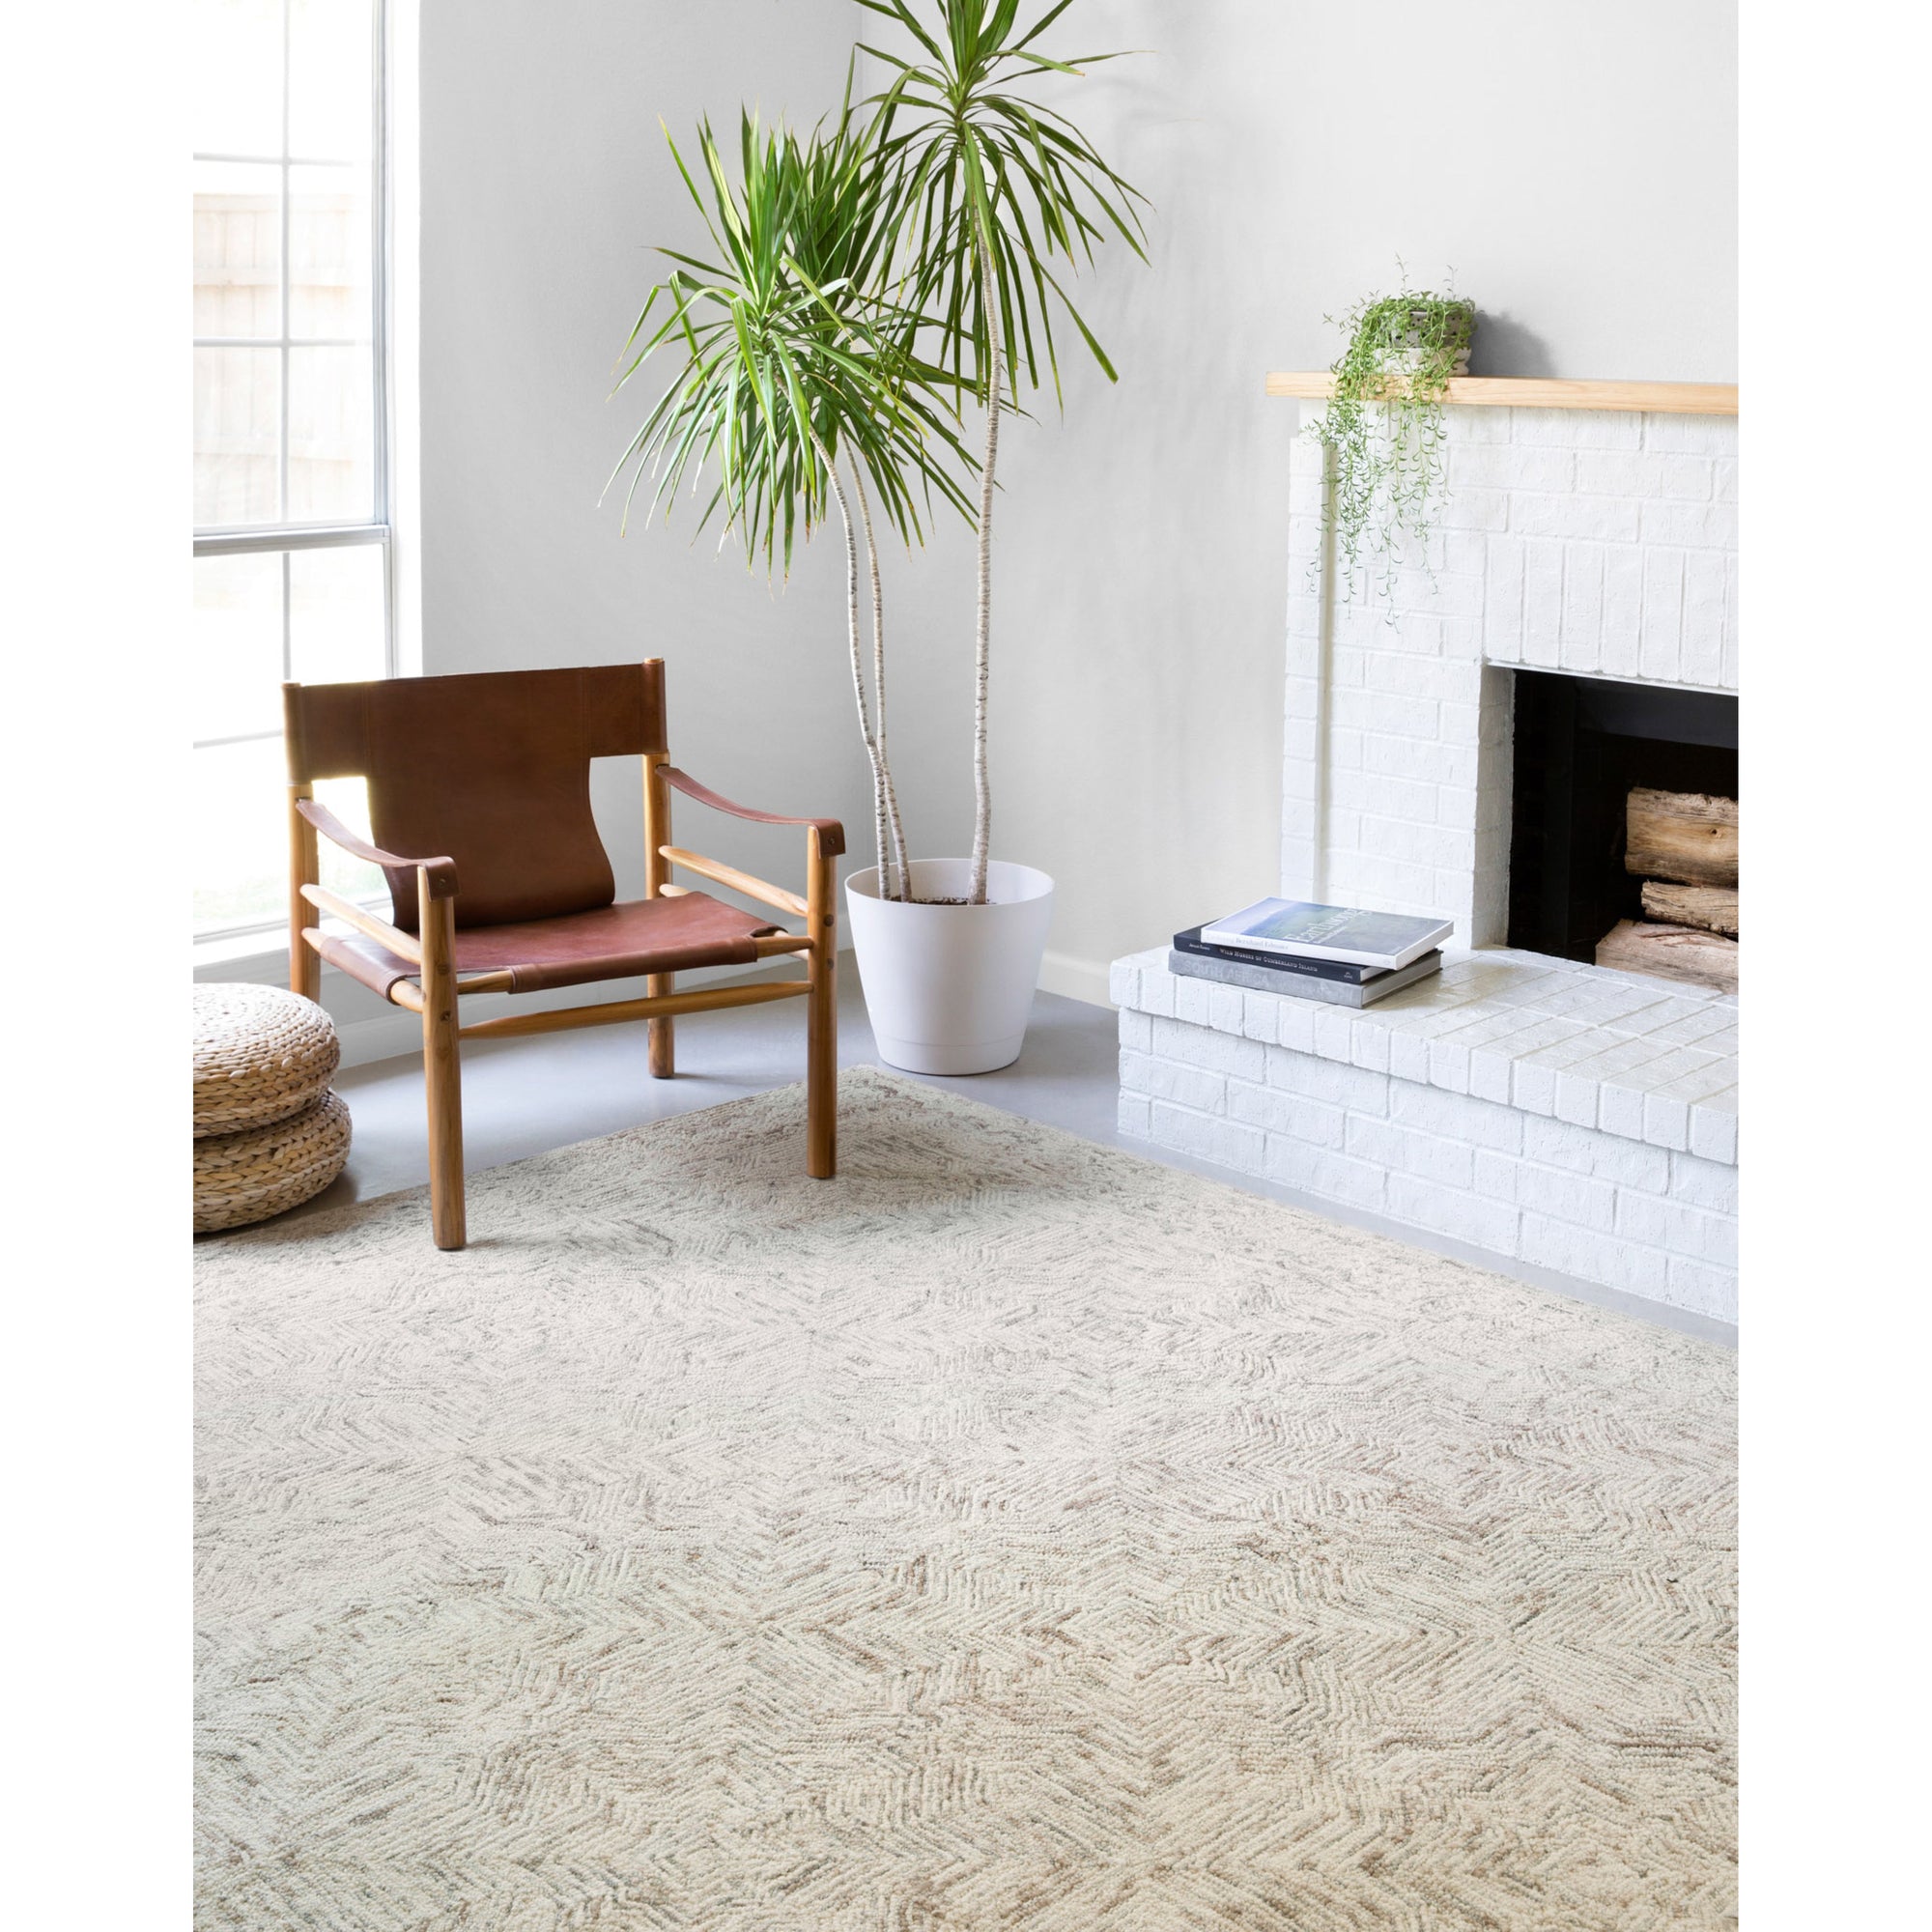 Rugs by Roo Loloi Ziva Neutral Area Rug in size 18" x 18" Sample